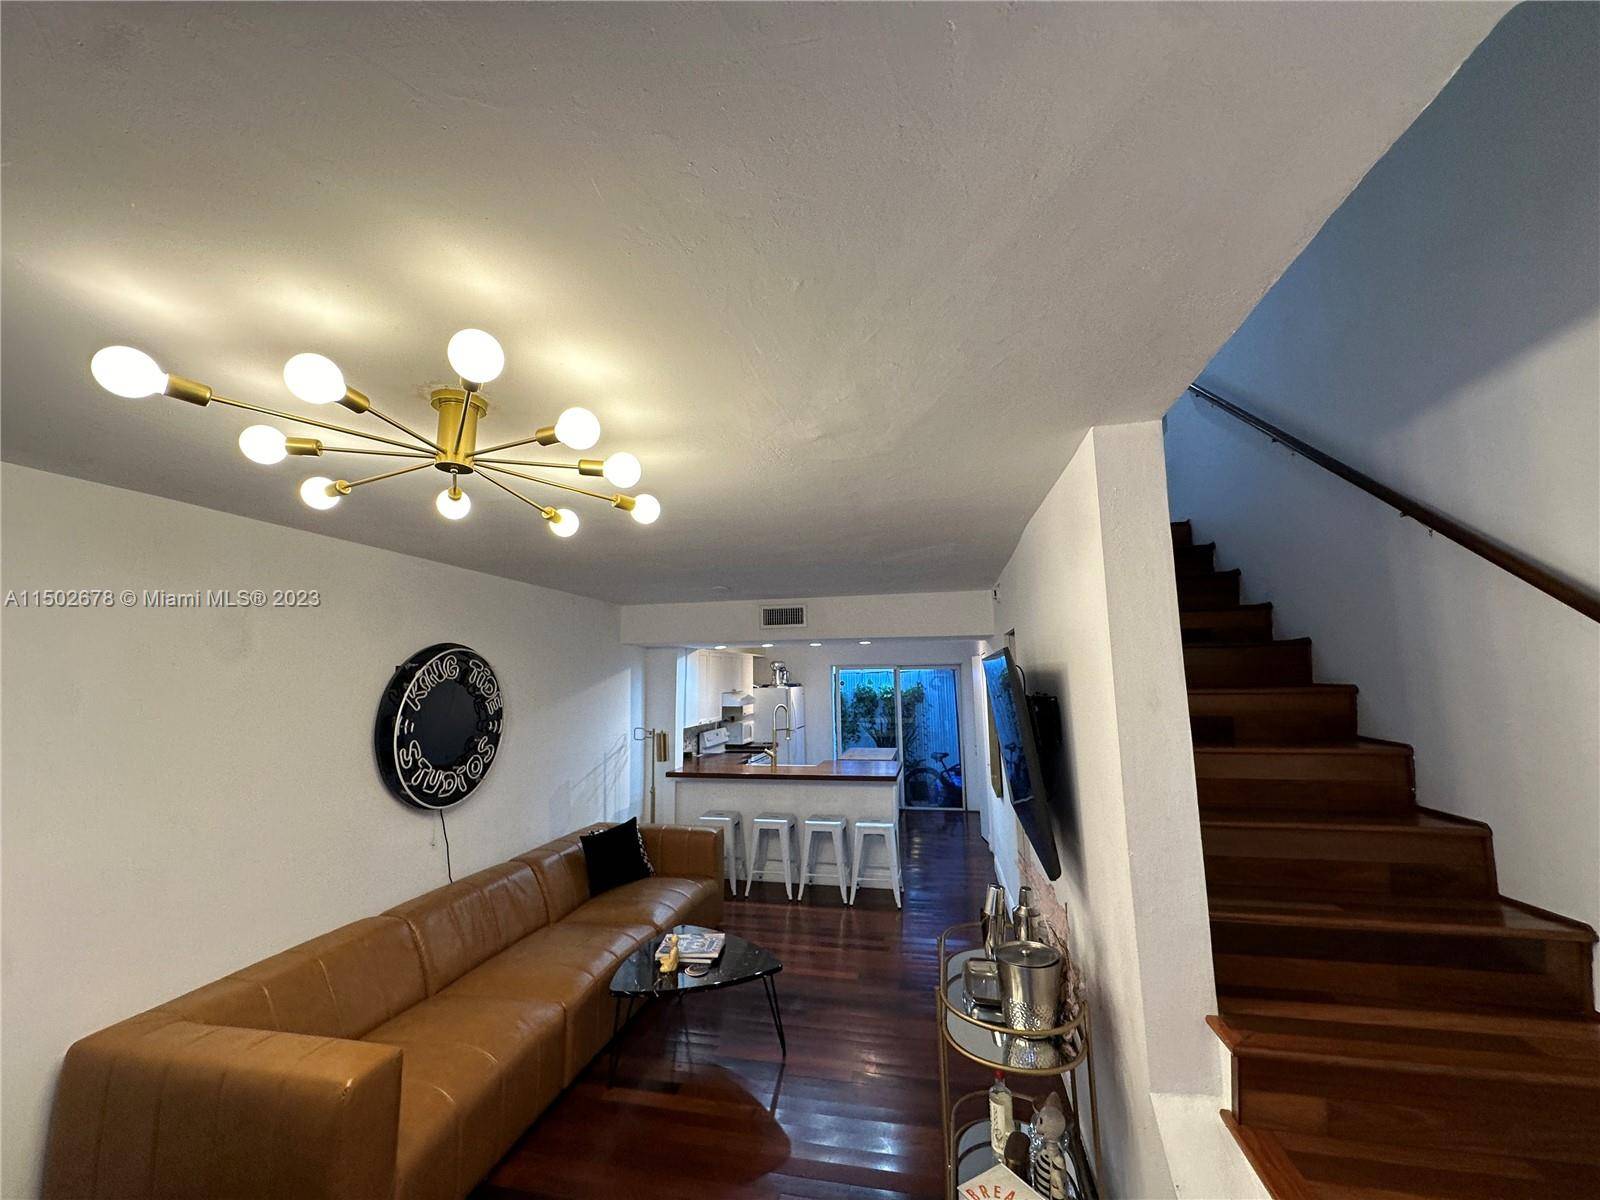 Experience South Beach living at its best in this solidly built two story 2 bedroom town house featuring 2 mosaic tiles bathrooms, a desirable private patio, beautiful Brazilian cherry wood ...